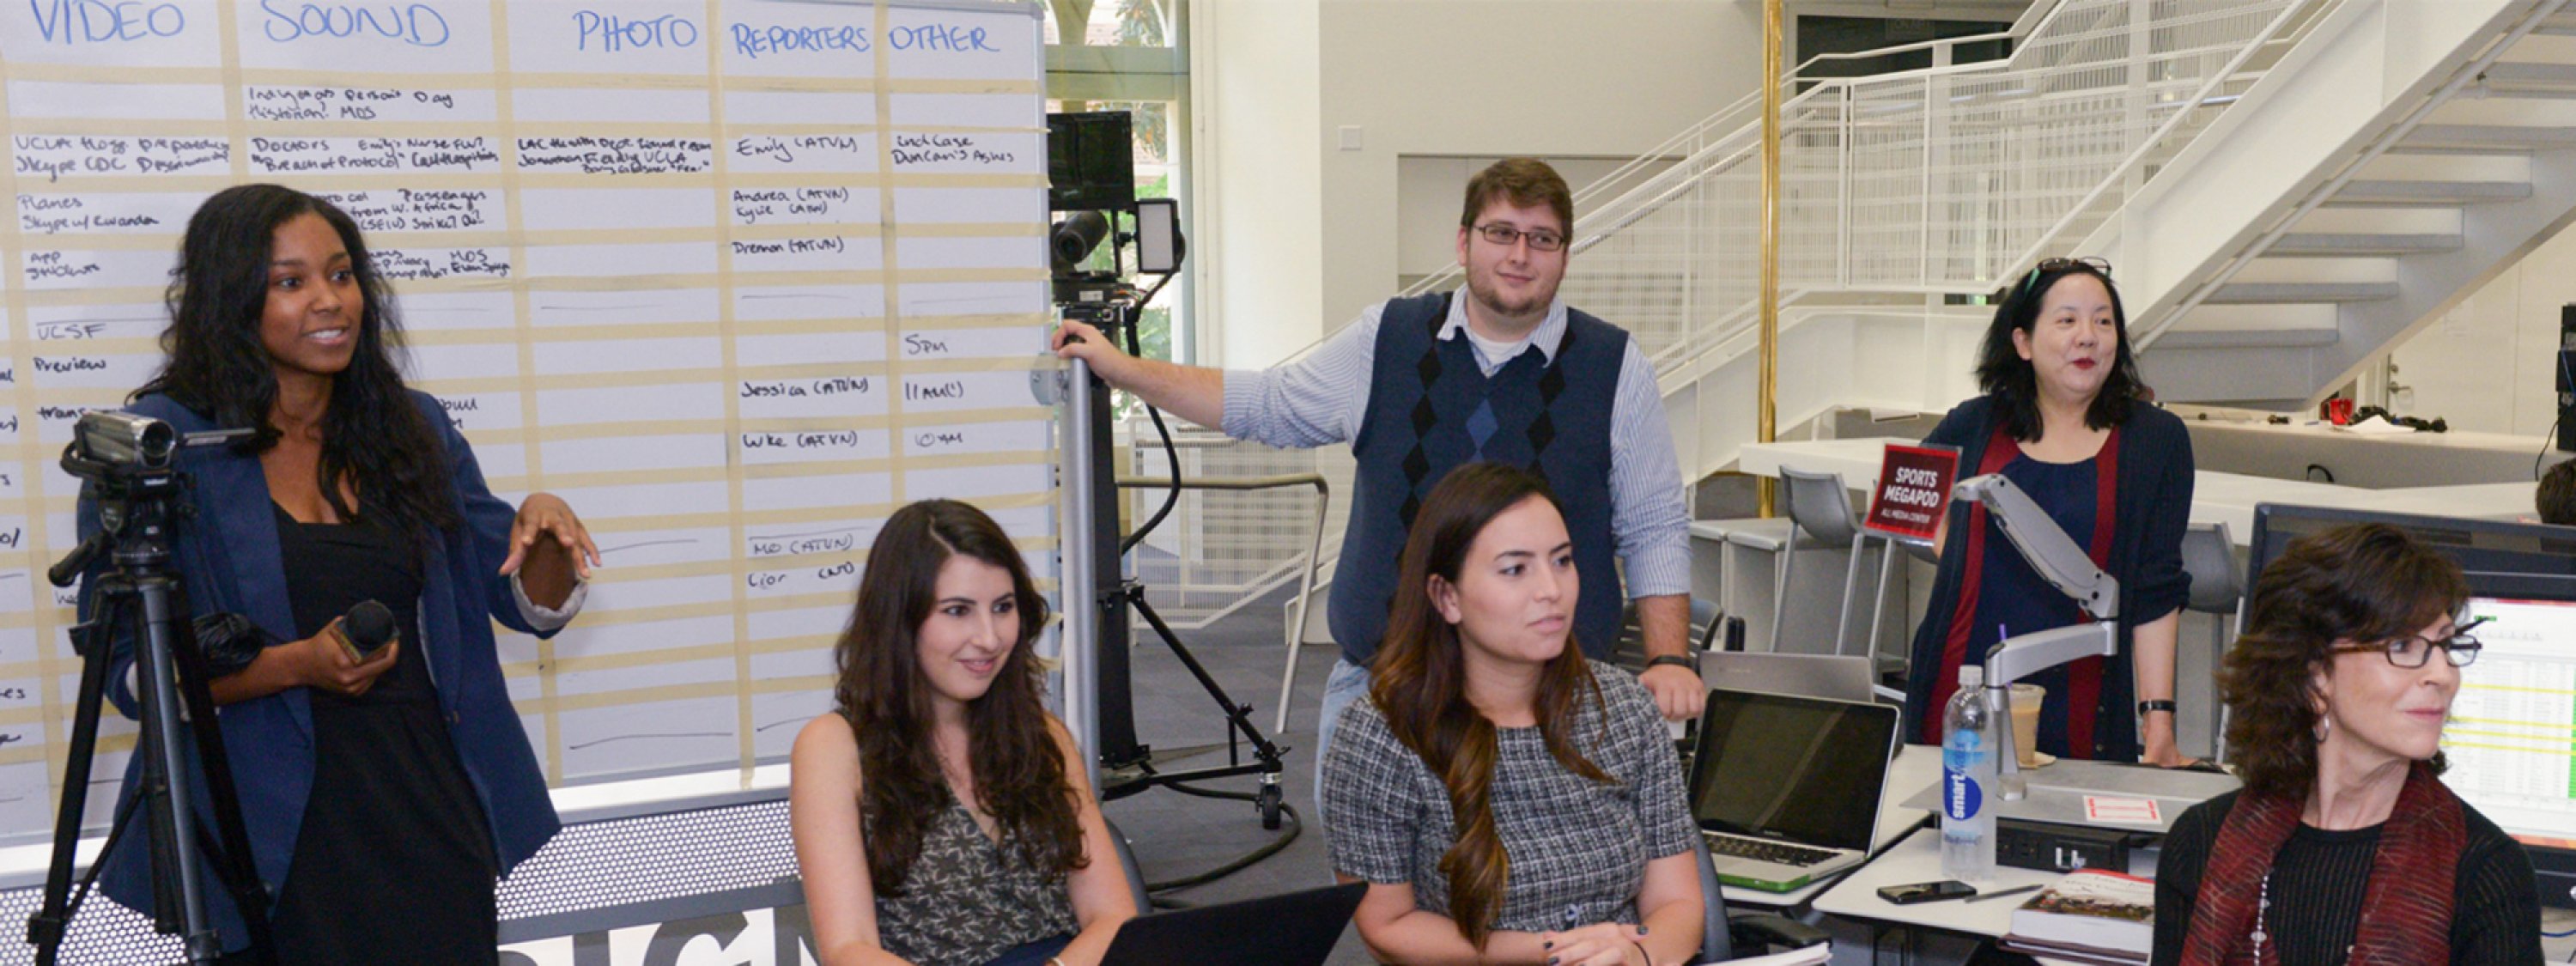 Photo of USC Annenberg students in the USC Media Center